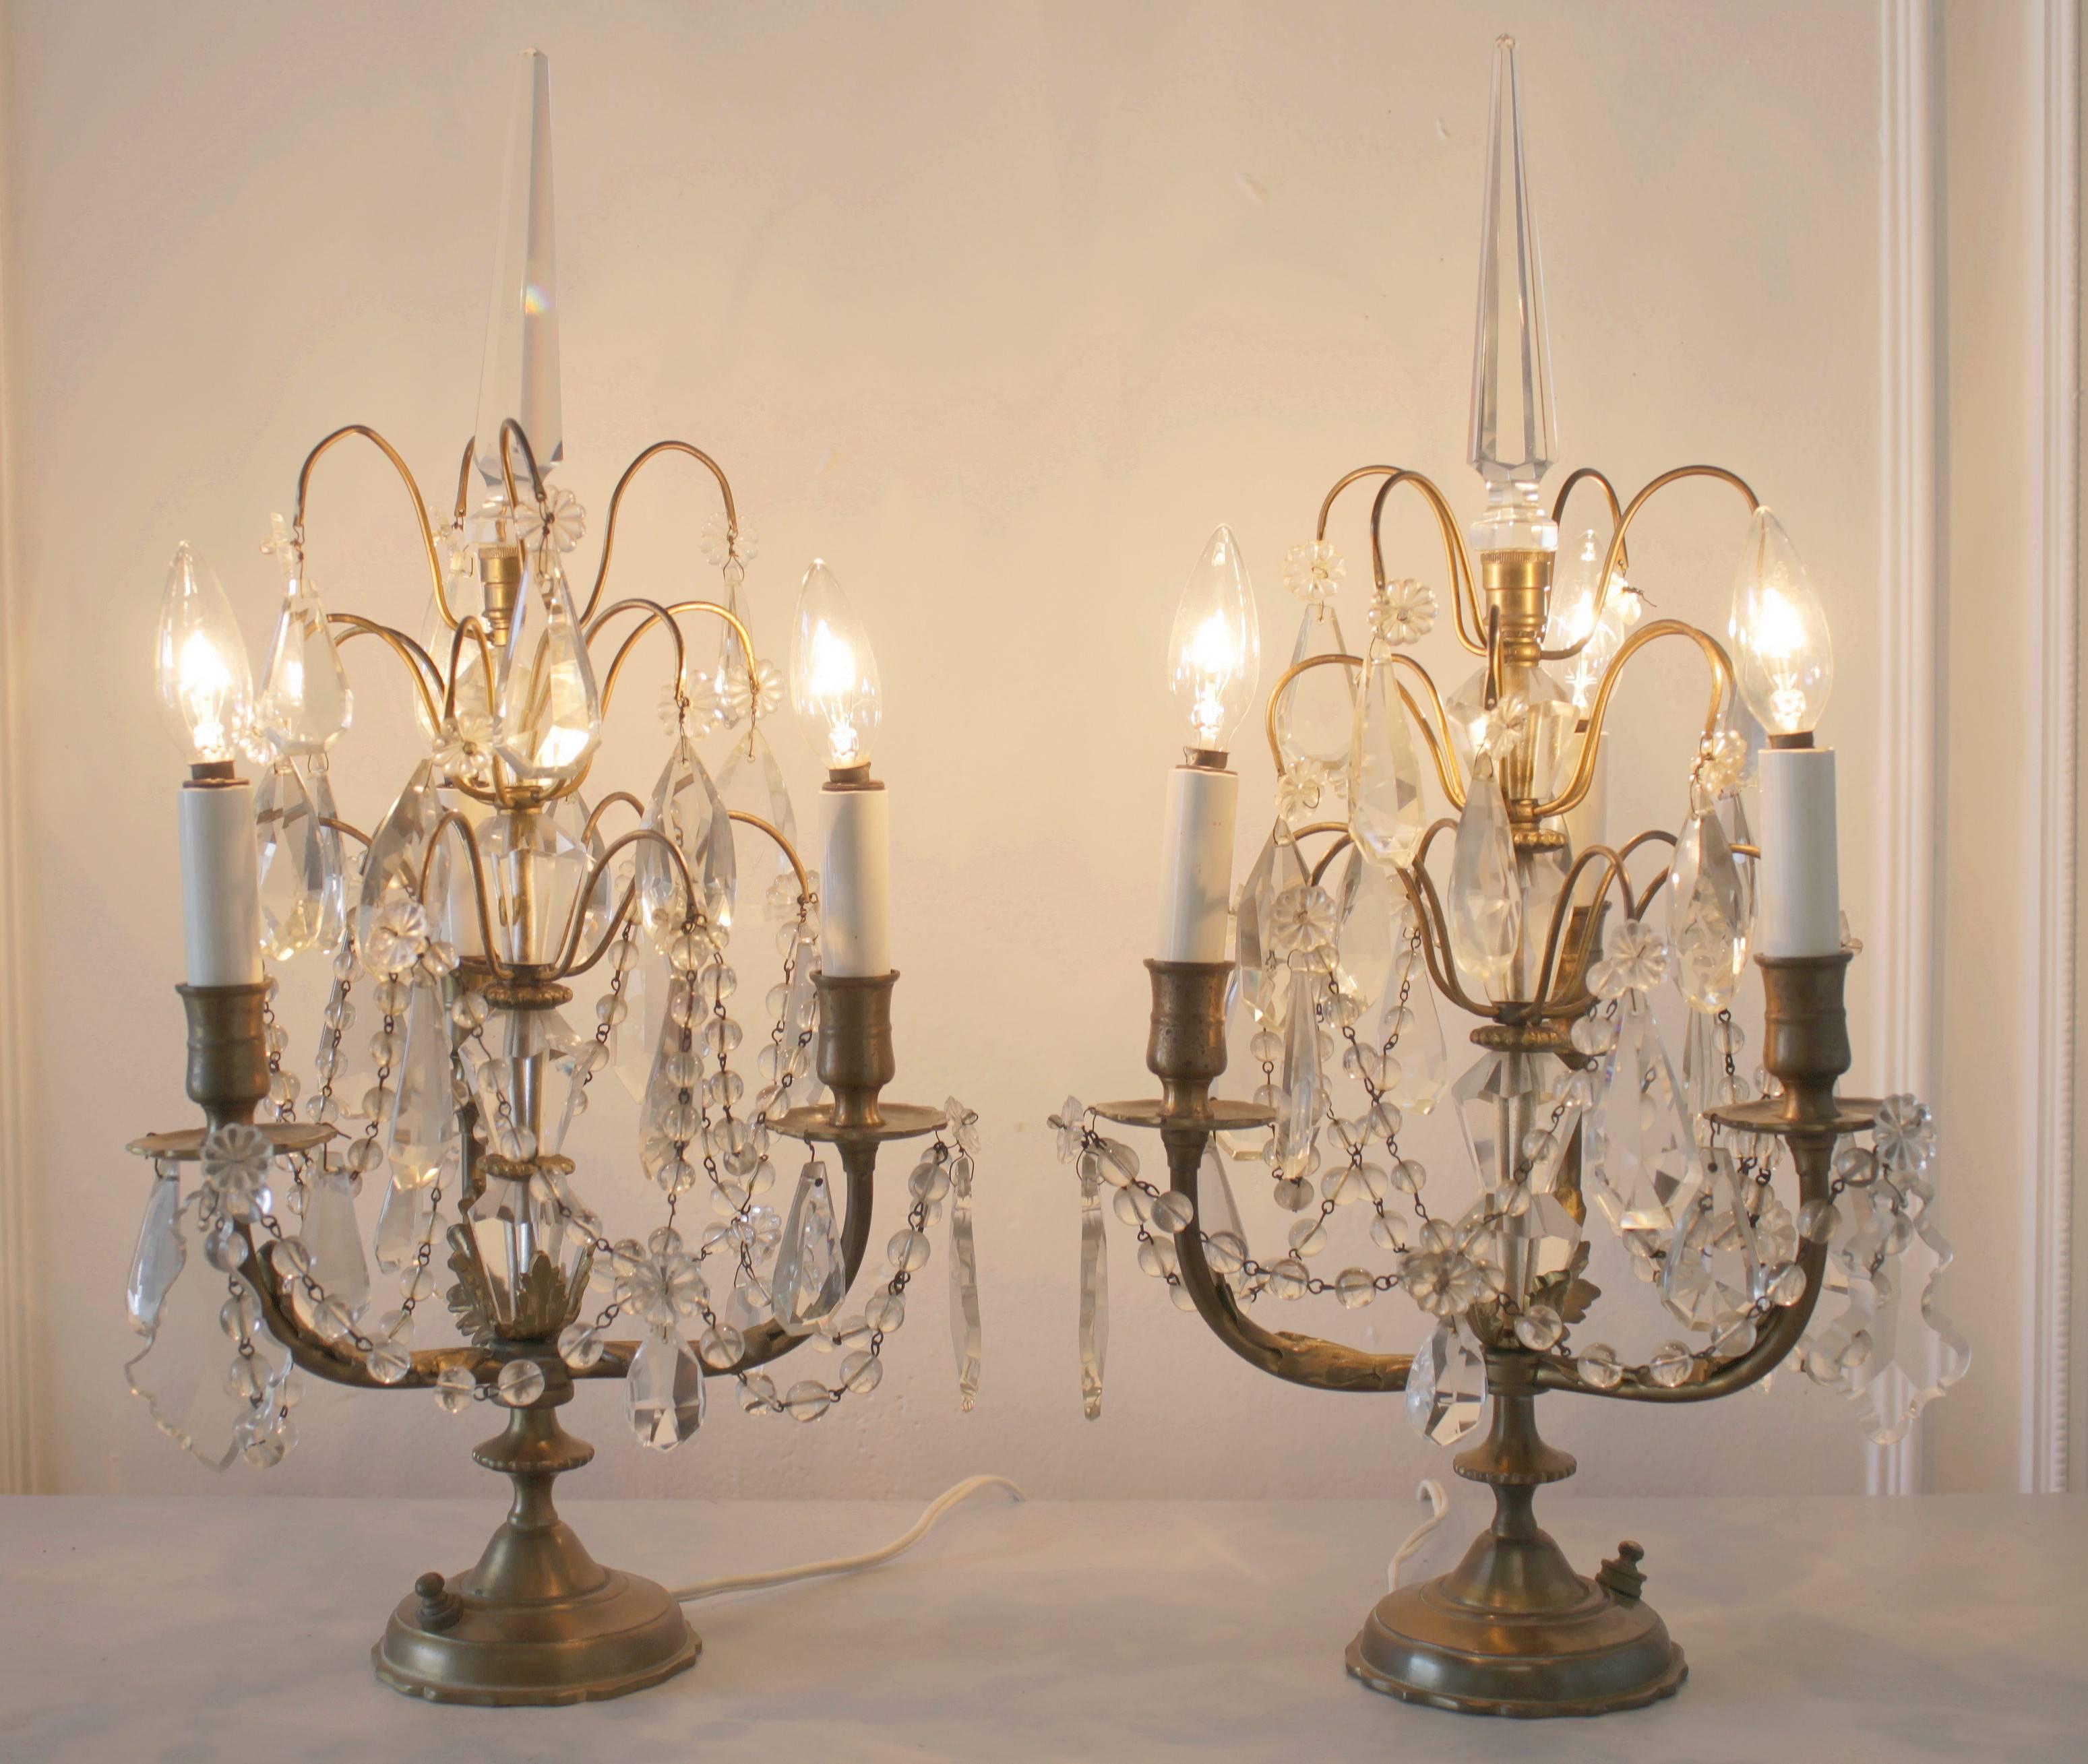 Pair of petite three-light Girandole lamps with swags of English cut beaded crystals and large crystal obelisk. The lamps can be turned on and off easily at the base. They are in good working order and can use 40 watt US chandelier bulbs in each